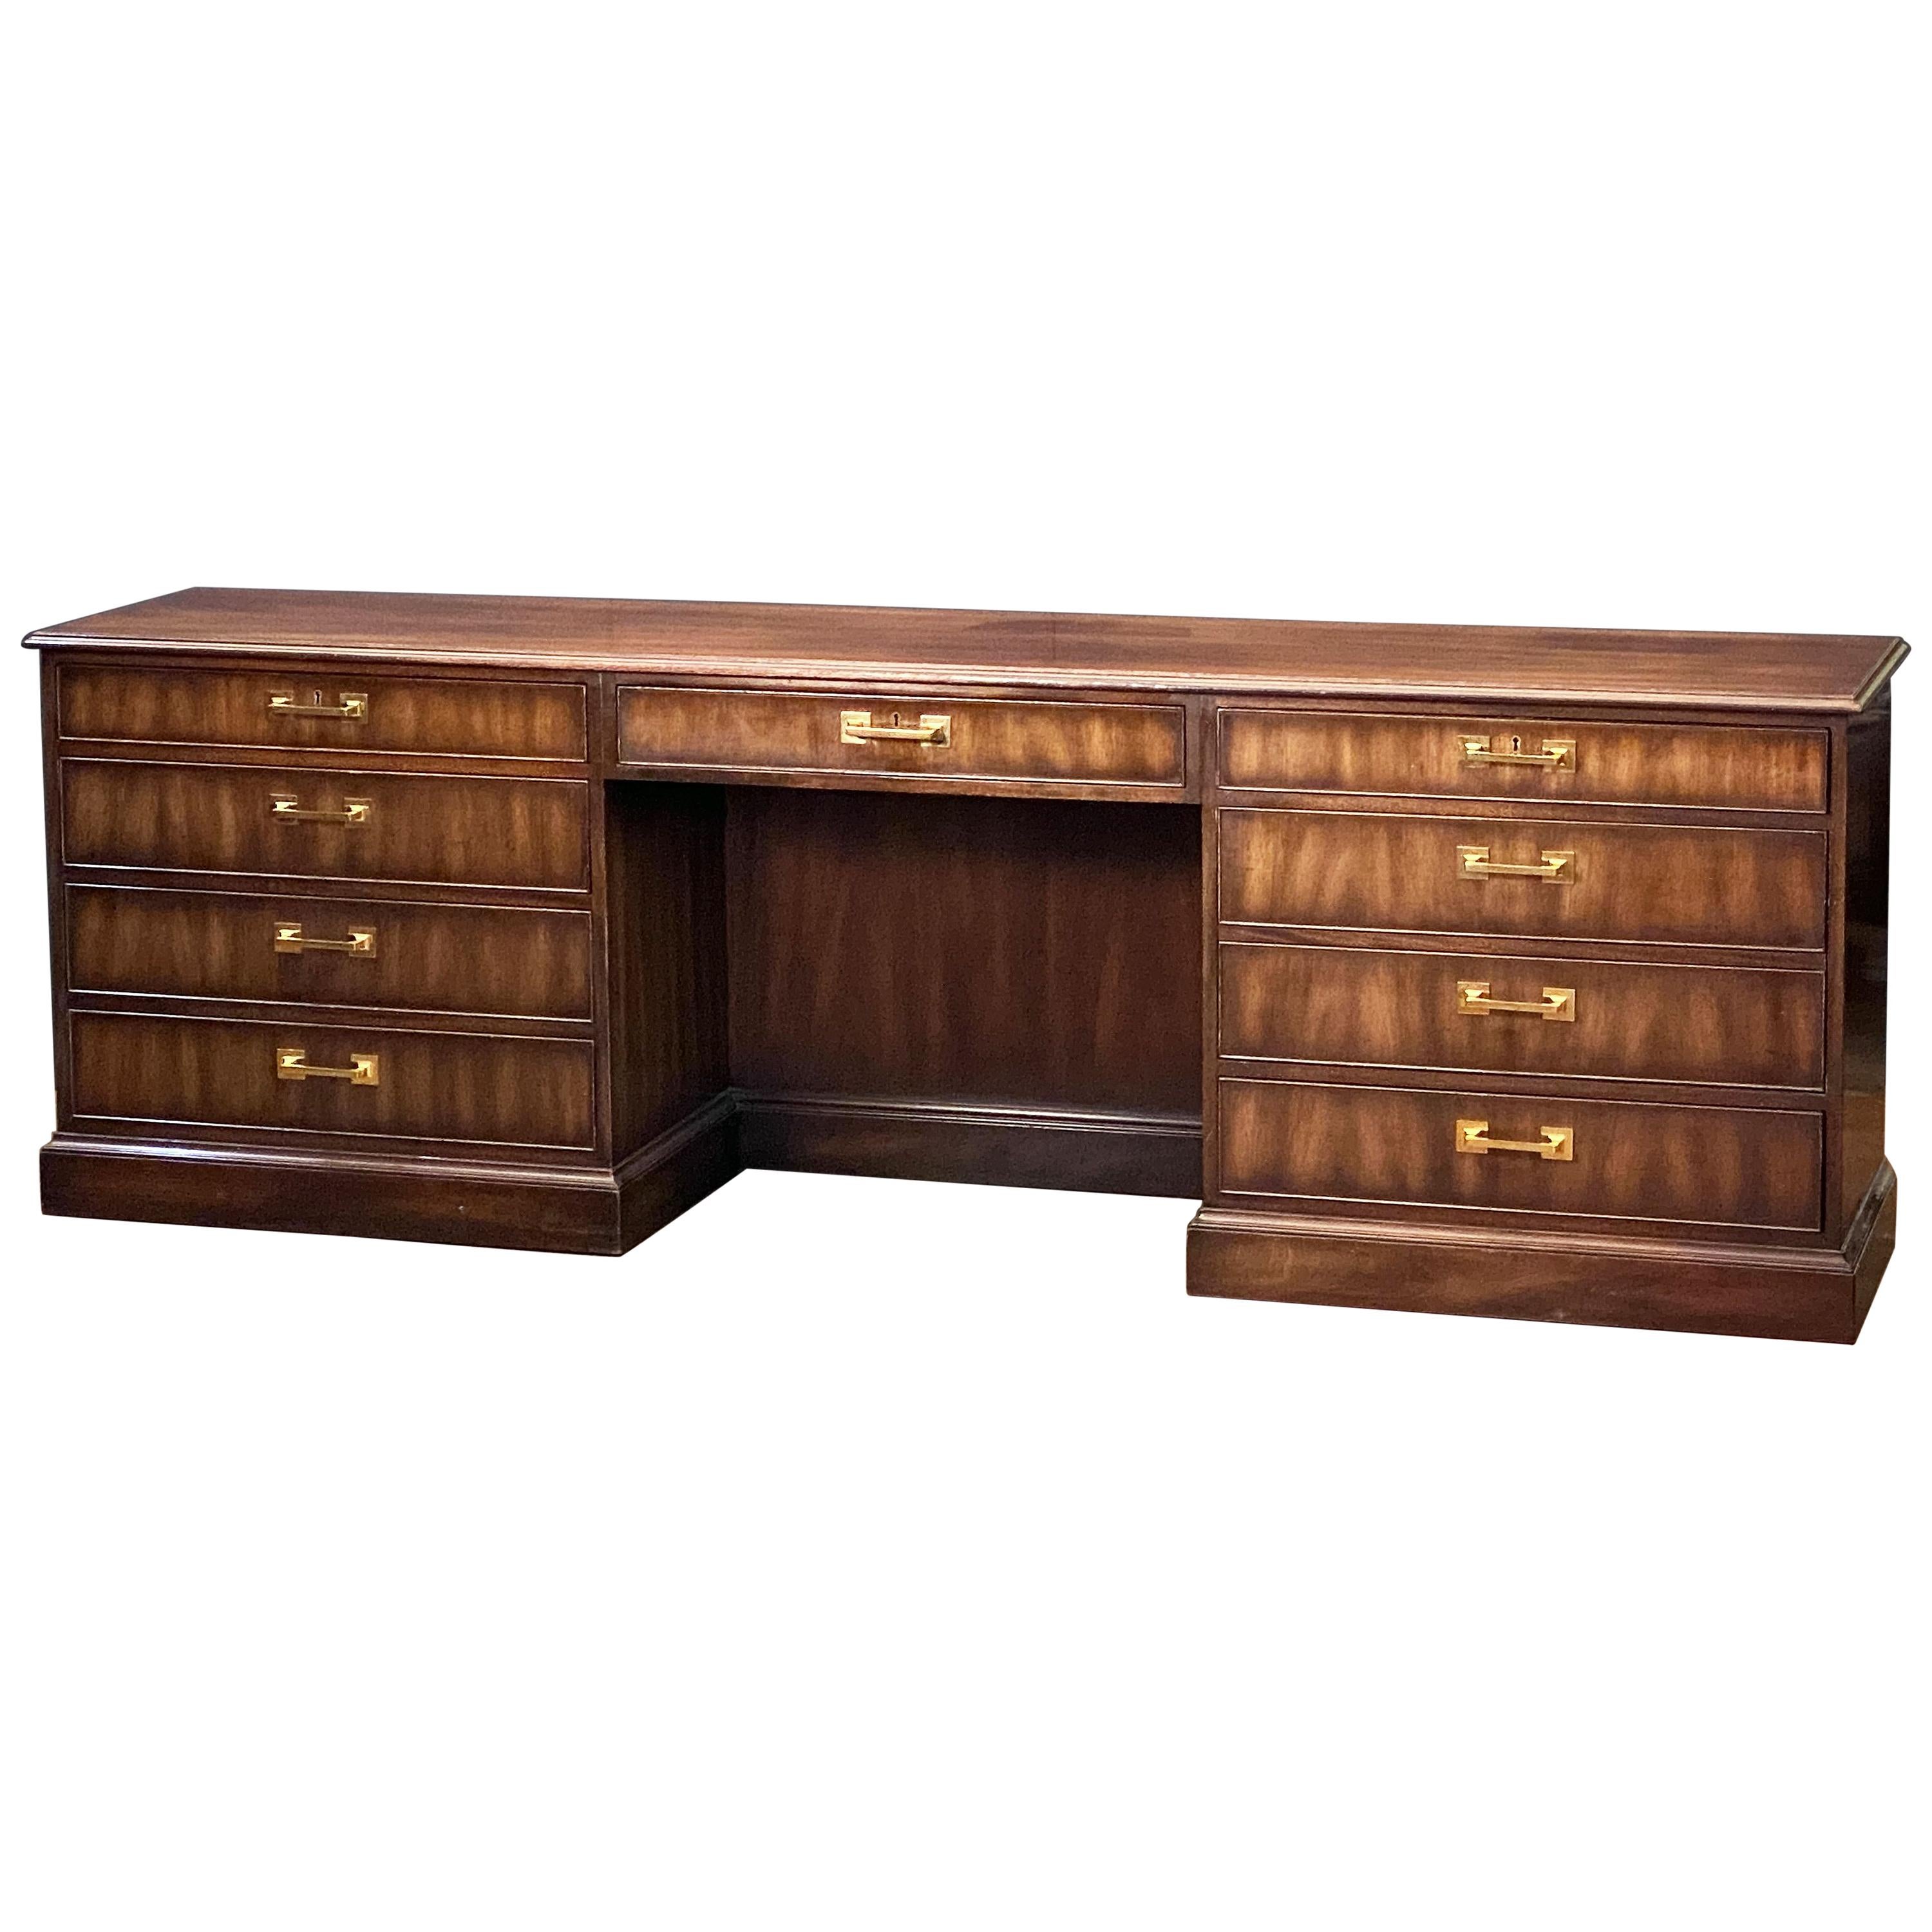 Large Executive Console Table with Drawers by Kittinger